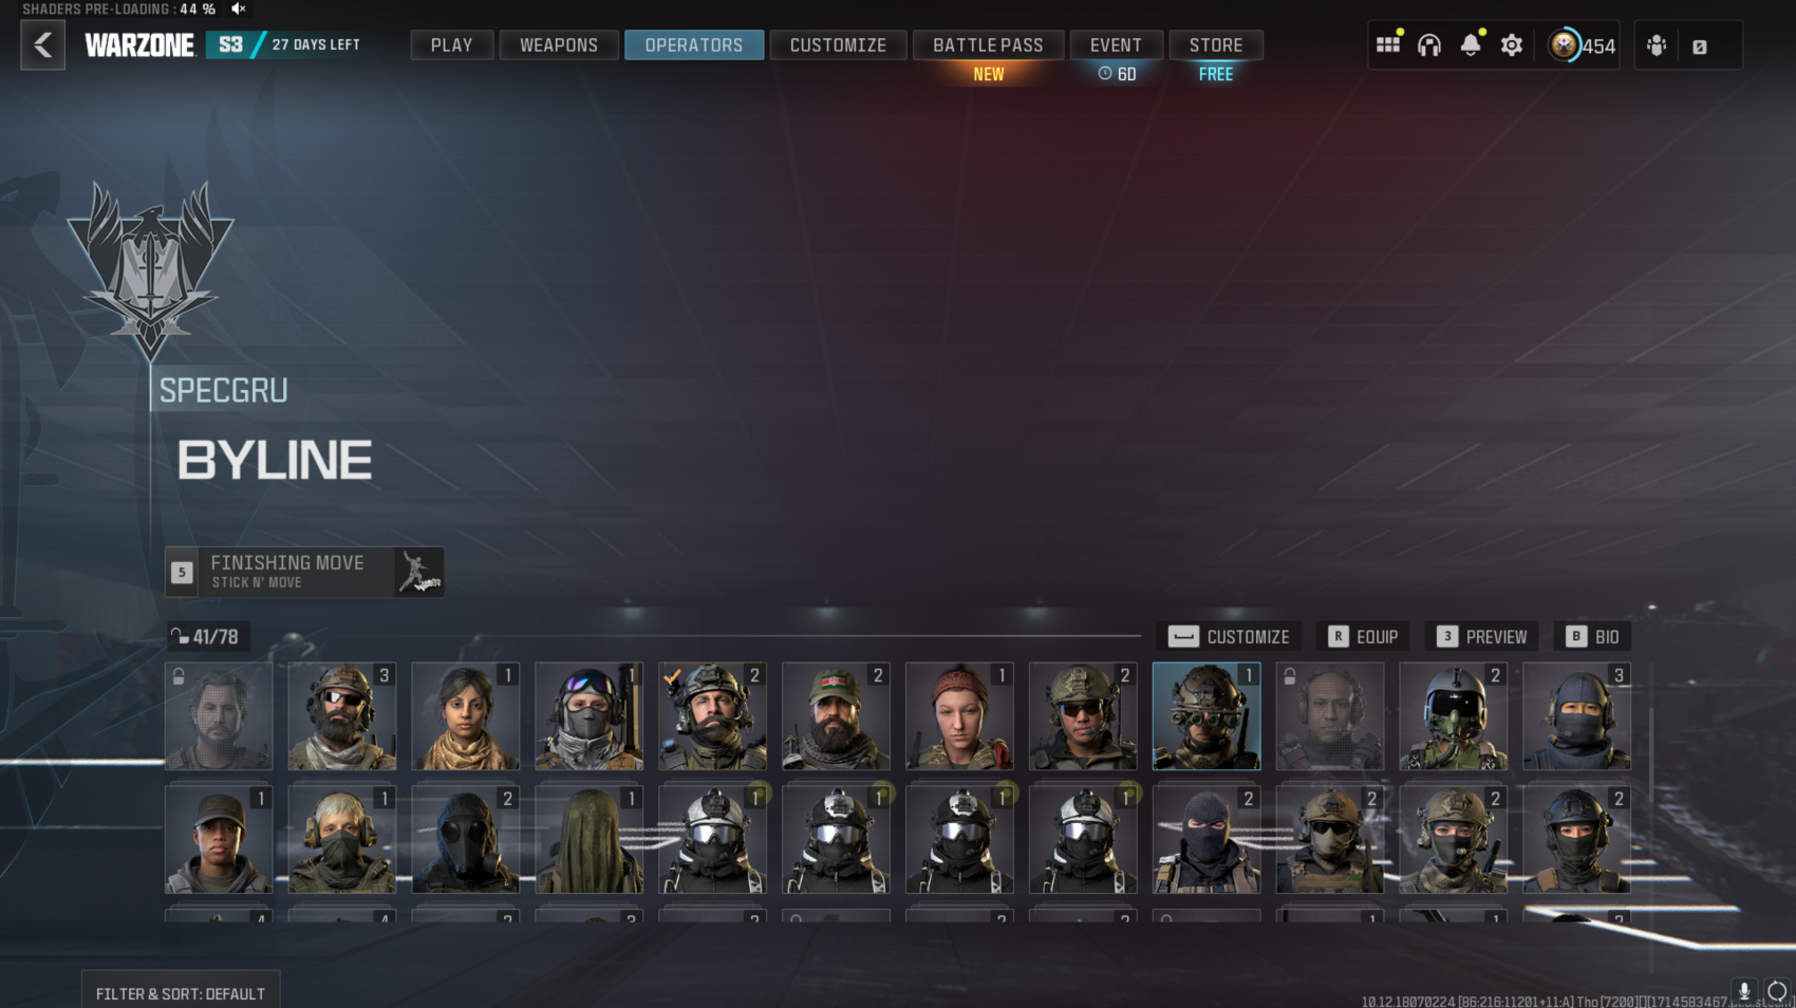 Warzone acc lvl 454/Interstellar camo+1 bundle and many more/Full access.